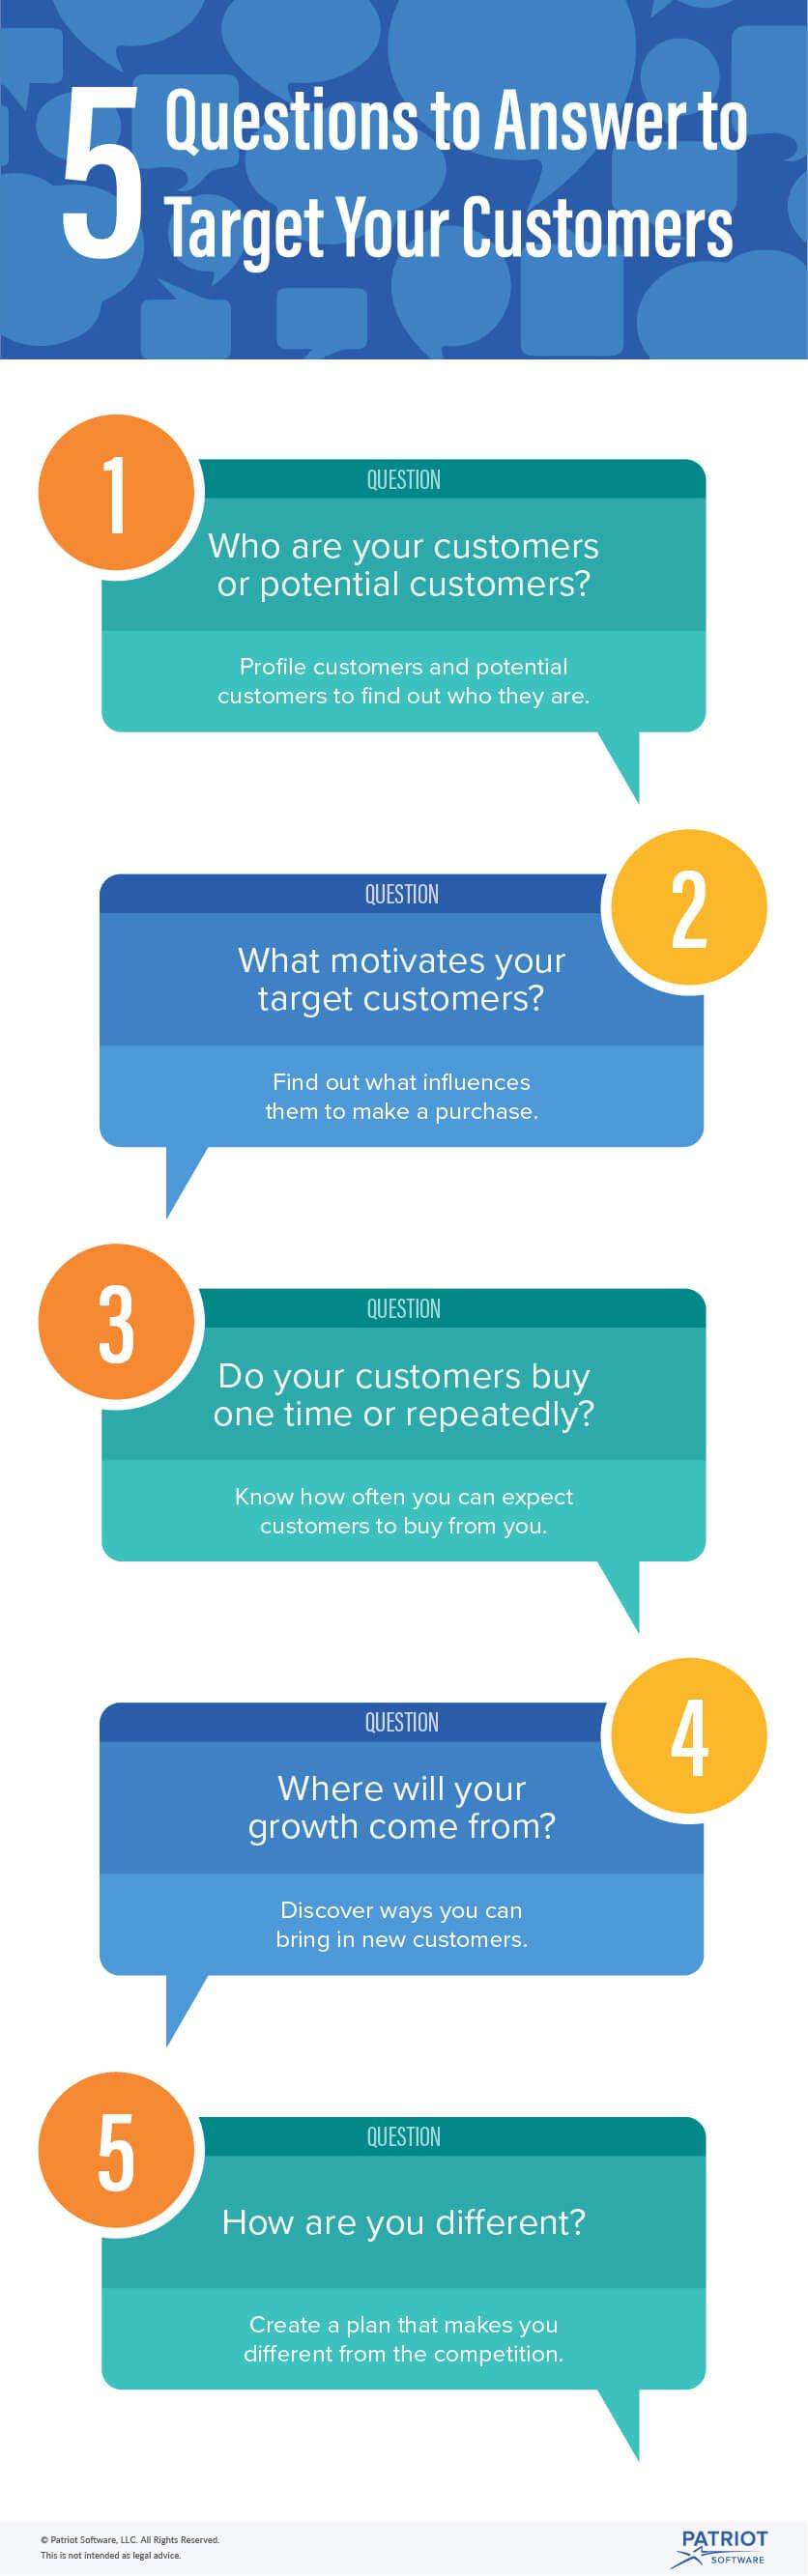 5 Questions to Answer to Target Your Customers Infographic